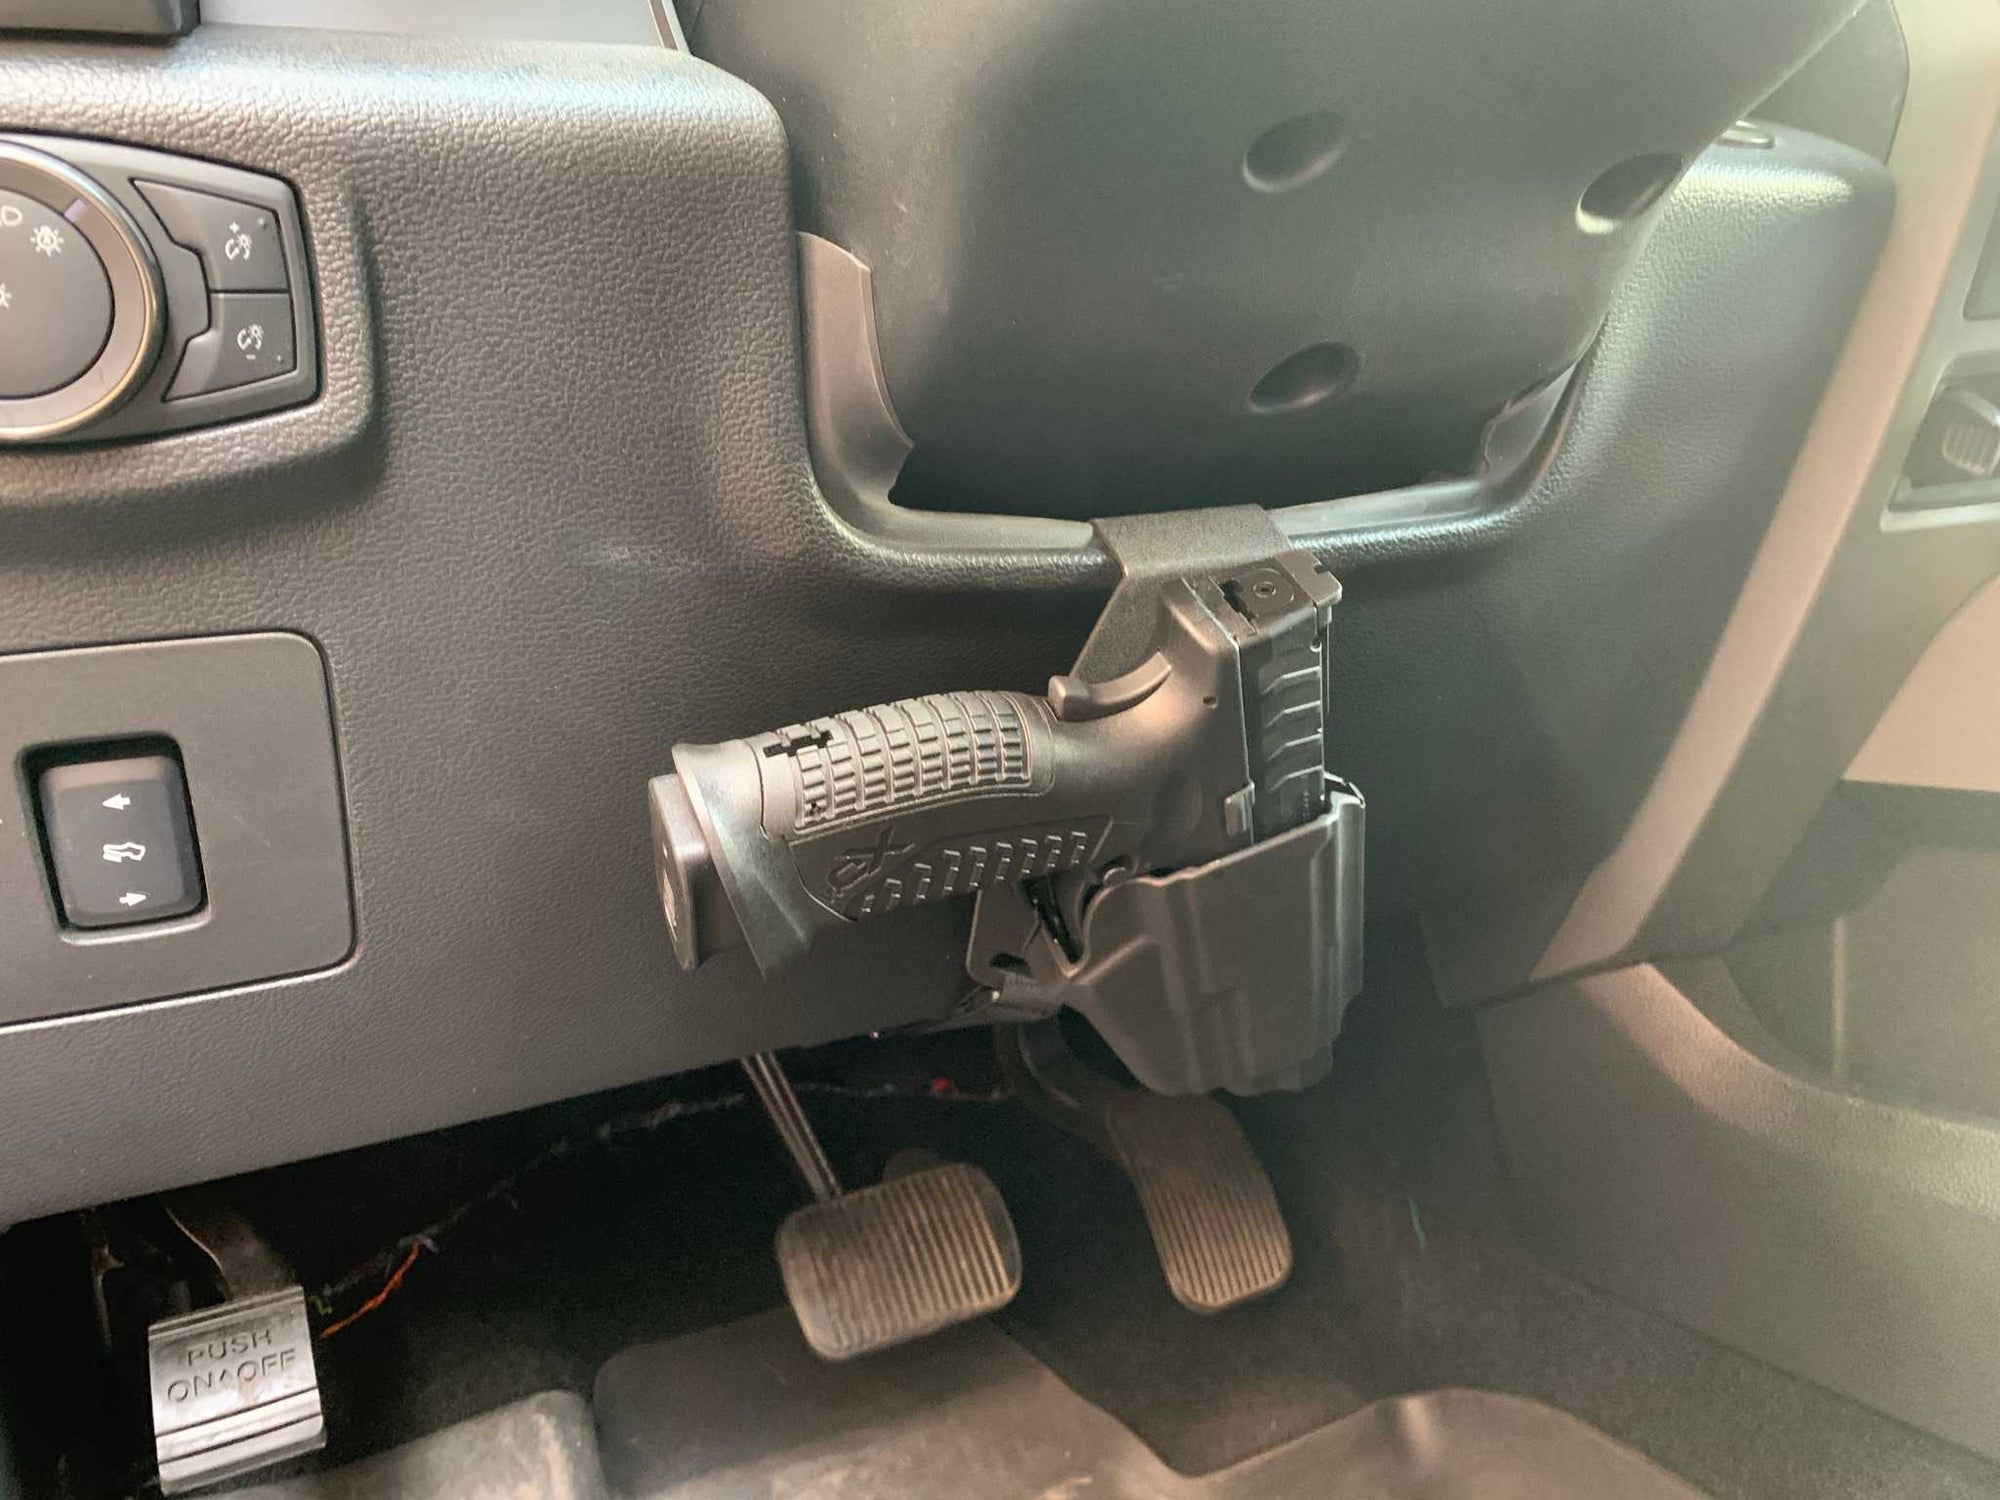 Tactical gun mount in vehicle for quick easy access and security